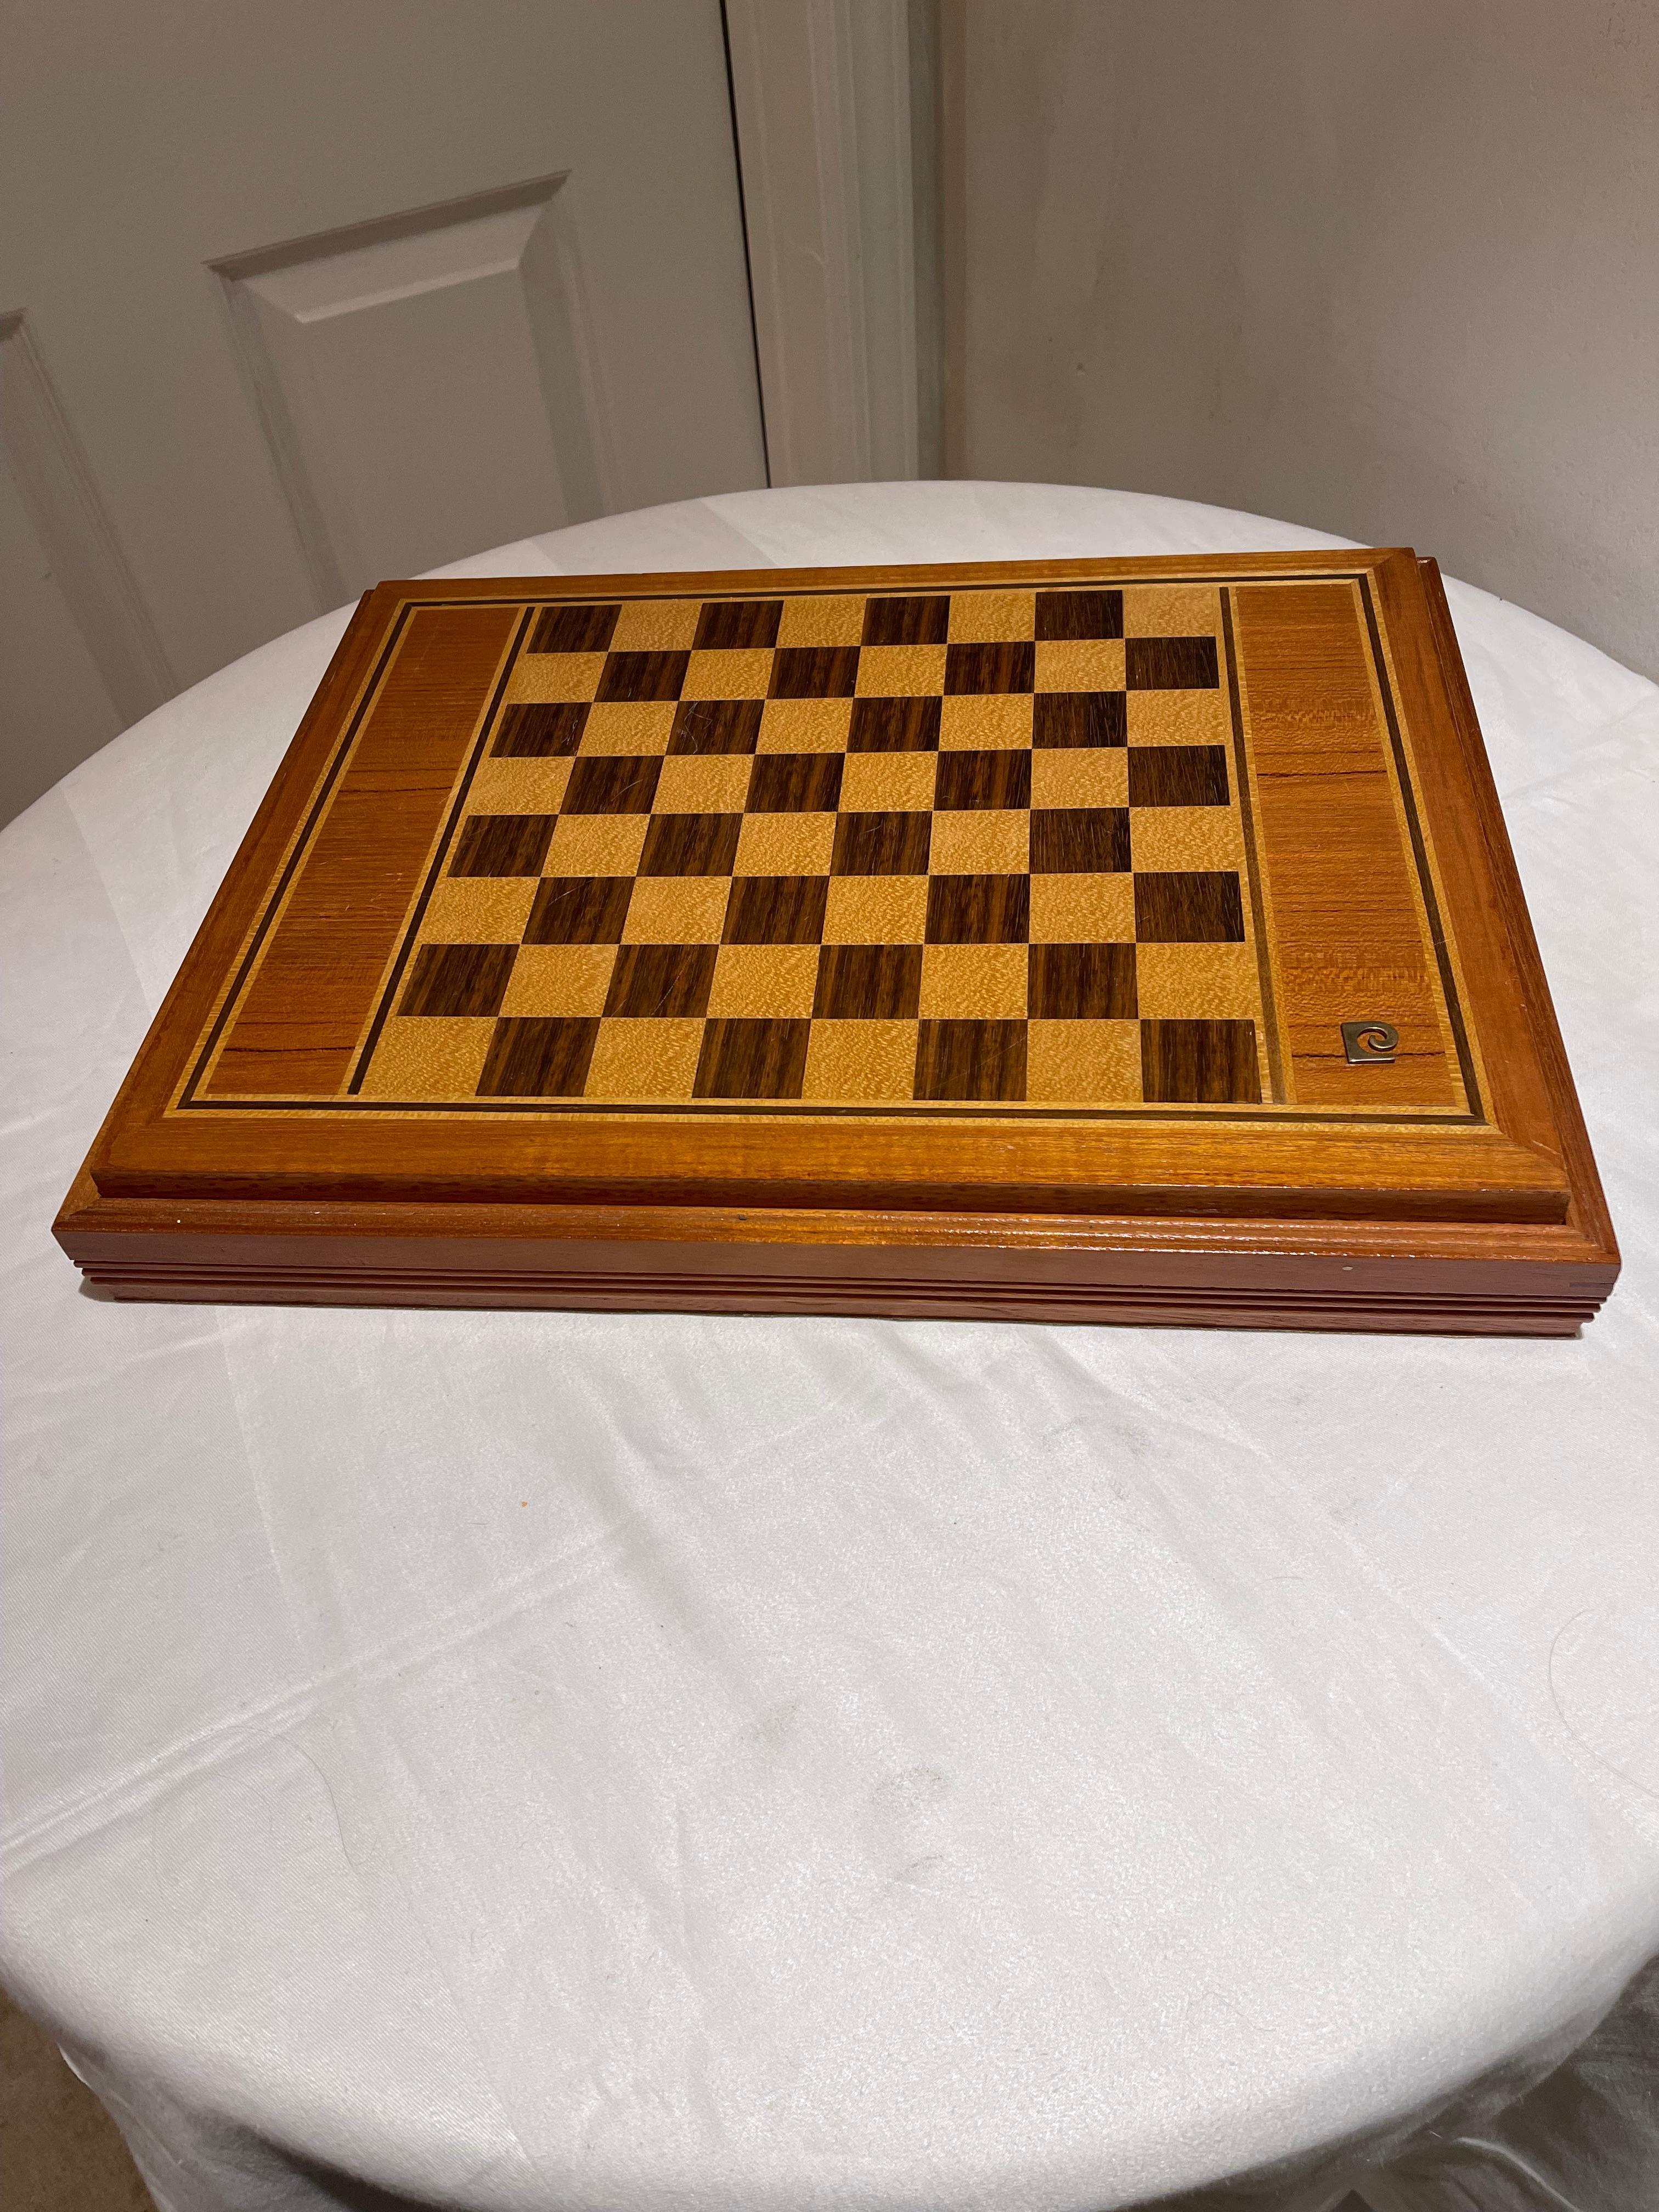 Pierre Cardin Wood Chess Set and Backgammon Set with 32 pieces stored in the case.  Made in the 1970s but brand new with original tags, logo and pamphlet. Chess pieces are hand carved and made of wood. The backgammon pieces and dice are plastic with